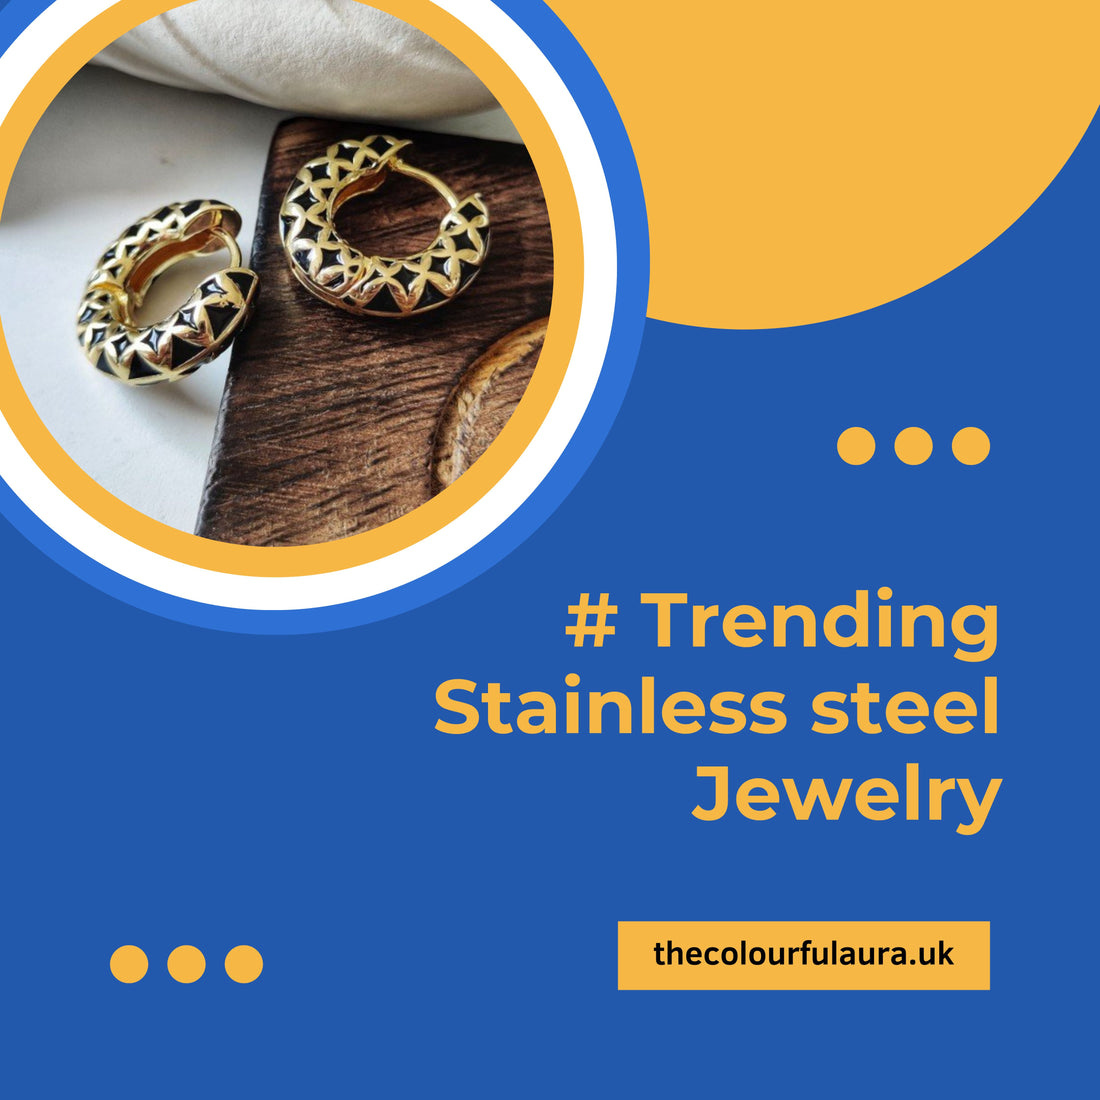 Top Stainless Steel Jewellery to Buy under £20.00 to buy in 2022